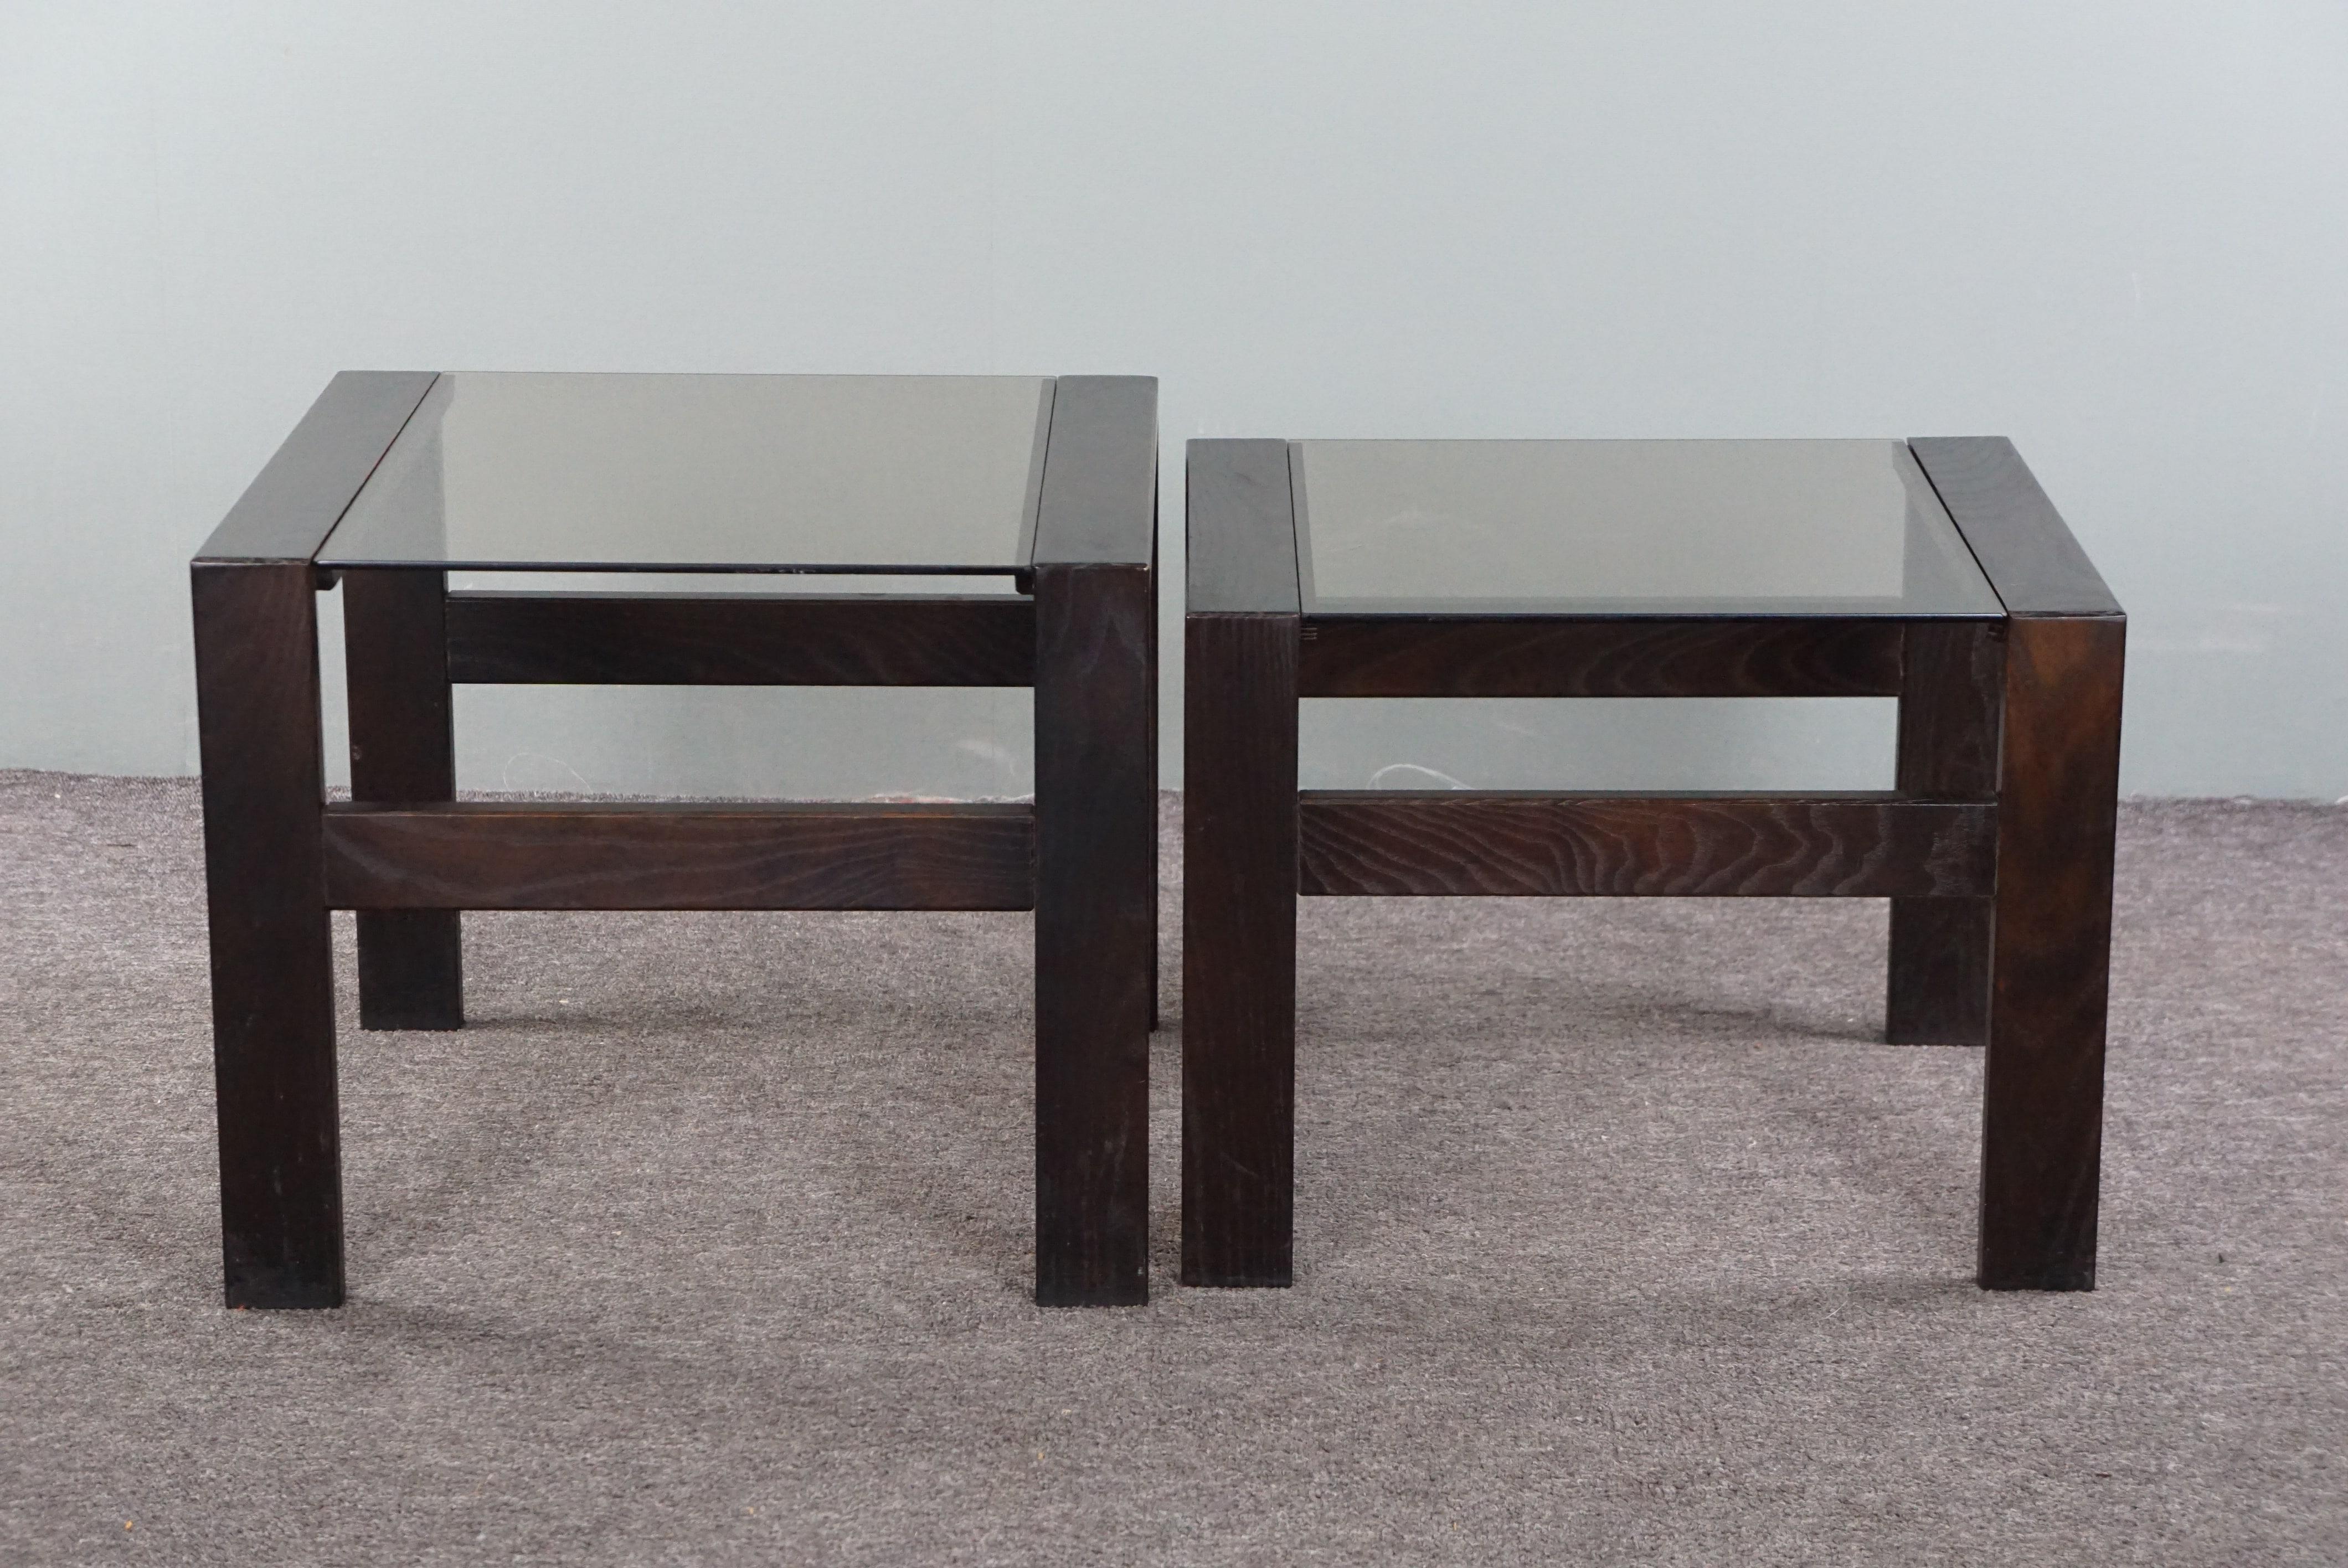 Offered is this charming set of 2 vintage coffee tables or side tables from the 1970s, made of wood and glass. This delightful set is in a good condition and adds a playful touch to your interior. Great for use as a coffee table but also as a side